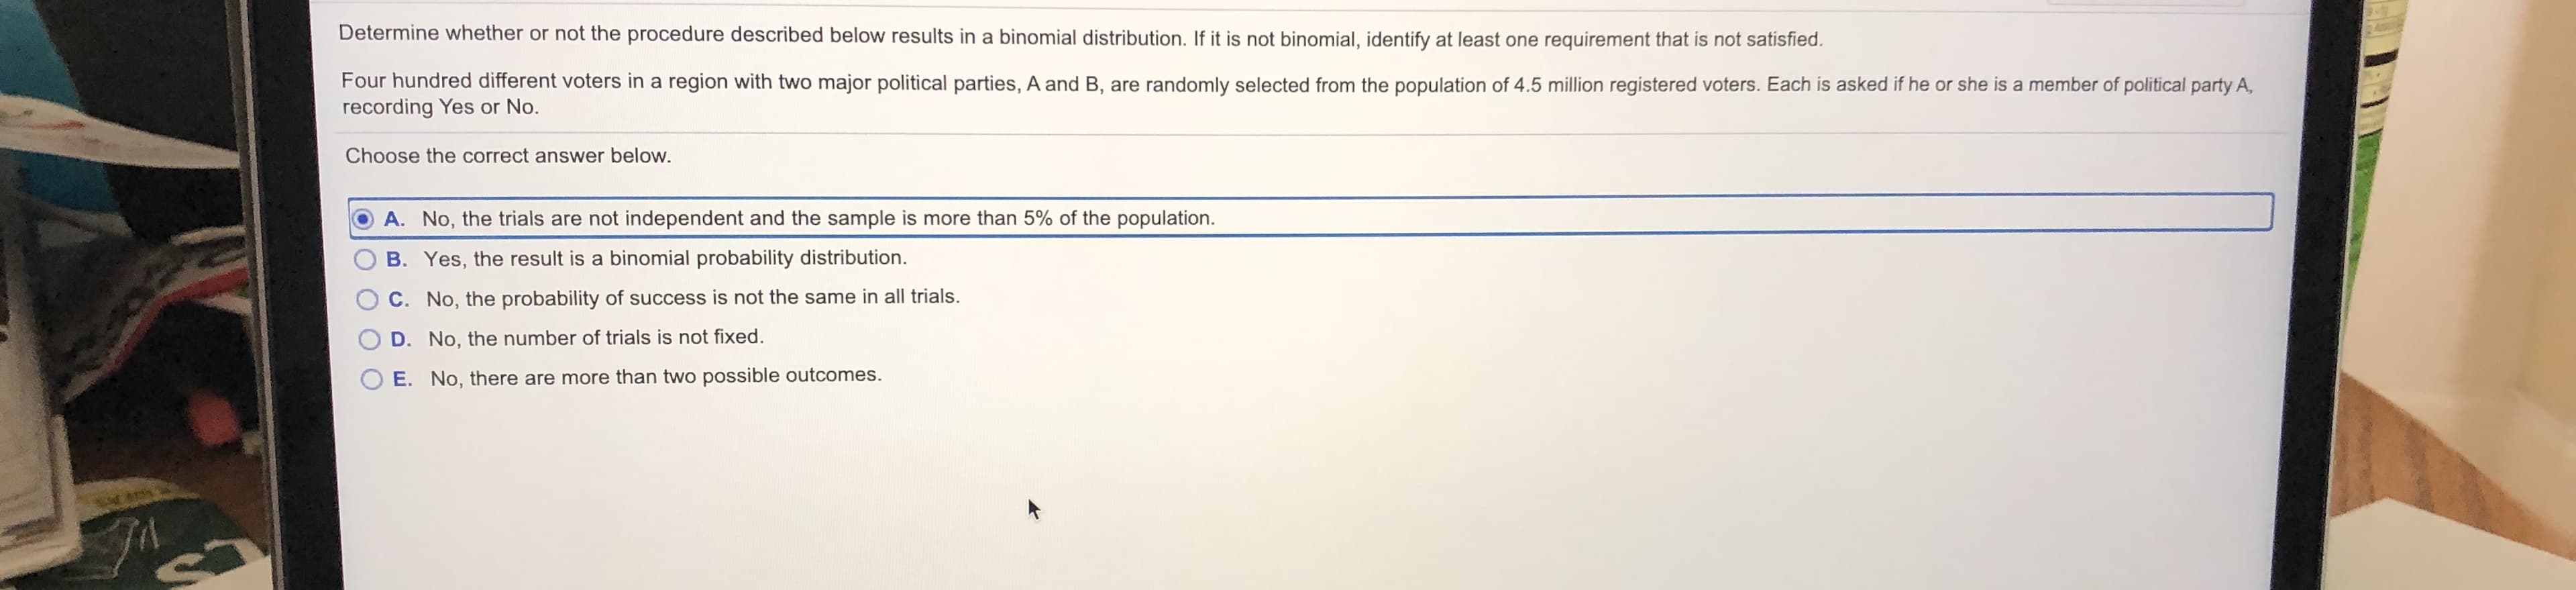 Determine whether or not the procedure described below results in a binomial distribution. If it is not binomial, identify at least one requirement that is not satisfied.
Four hundred different voters in a region with two major political parties, A and B, are randomly selected from the population of 4.5 million registered voters. Each is asked if he or she is a member of political party A,
recording Yes or No.
Choose the correct answer below.
A. No, the trials are not independent and the sample is more than 5% of the population.
B. Yes, the result is a binomial probability distribution.
C. No, the probability of success is not the same in all trials.
D. No, the number of trials is not fixed.
E. No, there are more than two possible outcomes.
